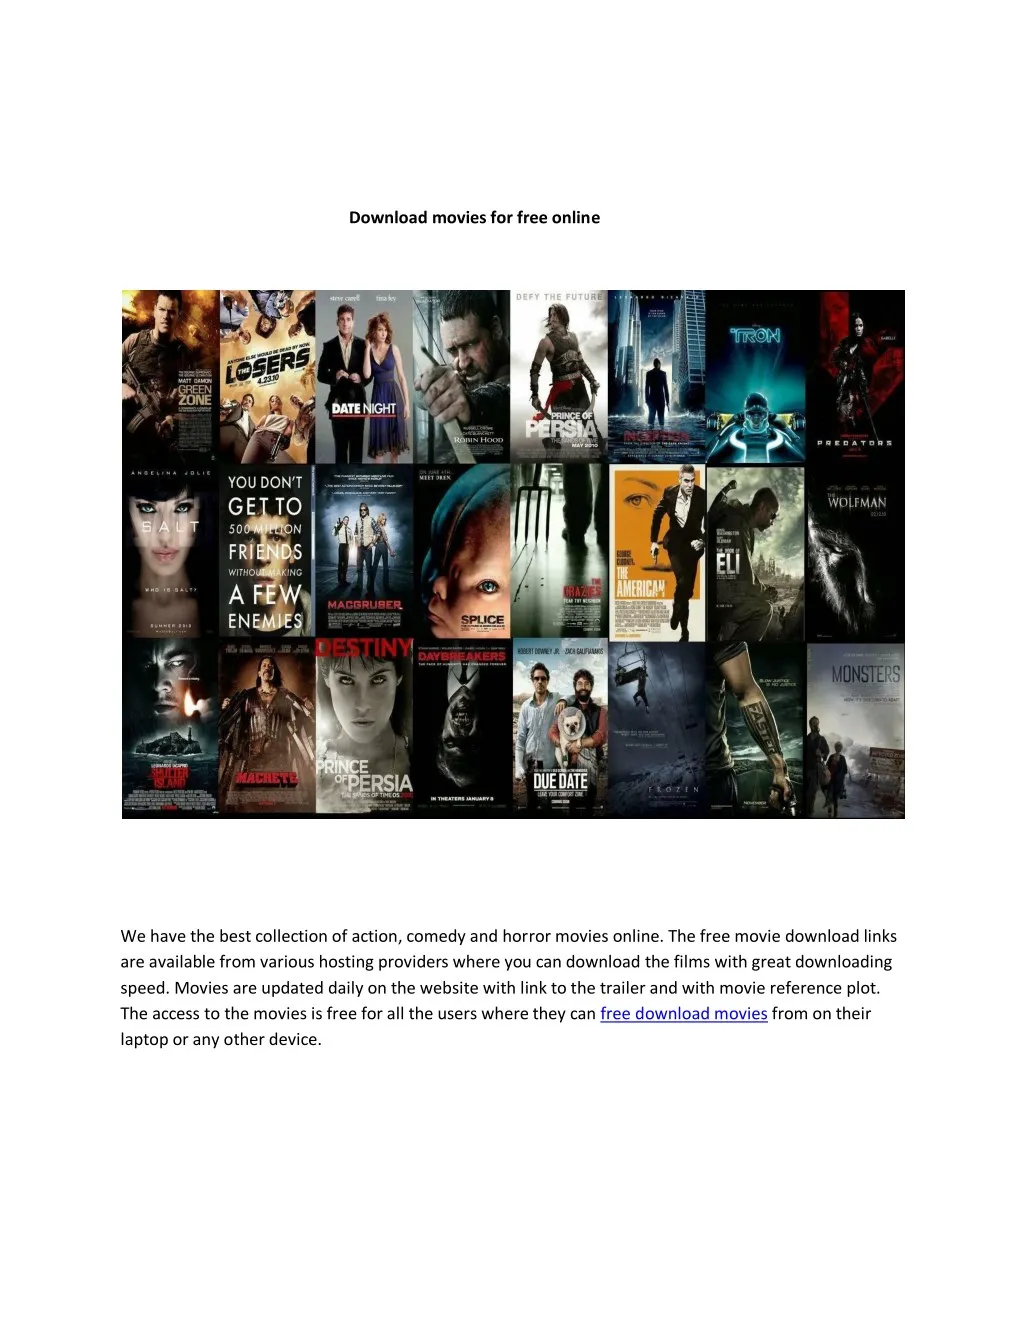 download movies for free online n.